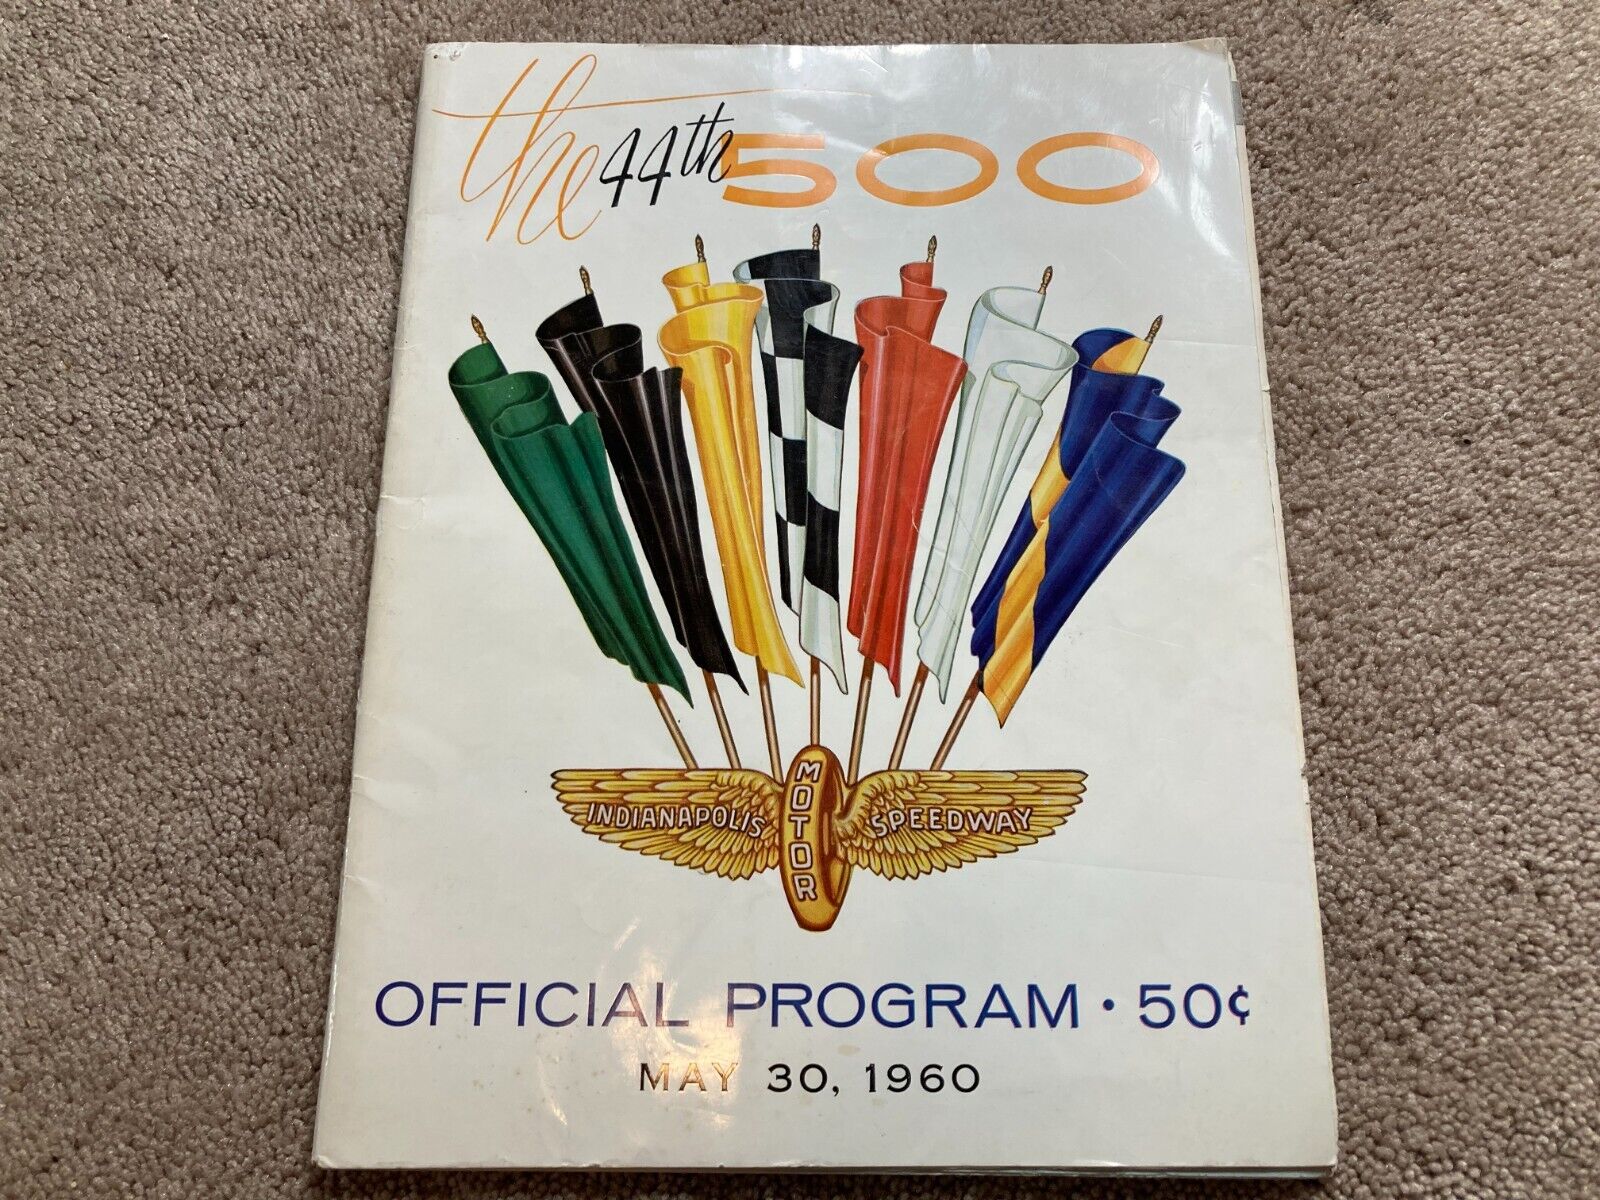 1960 The 44th 500 - Official Program May 30, Indianapolis Motor Speedway Vintage